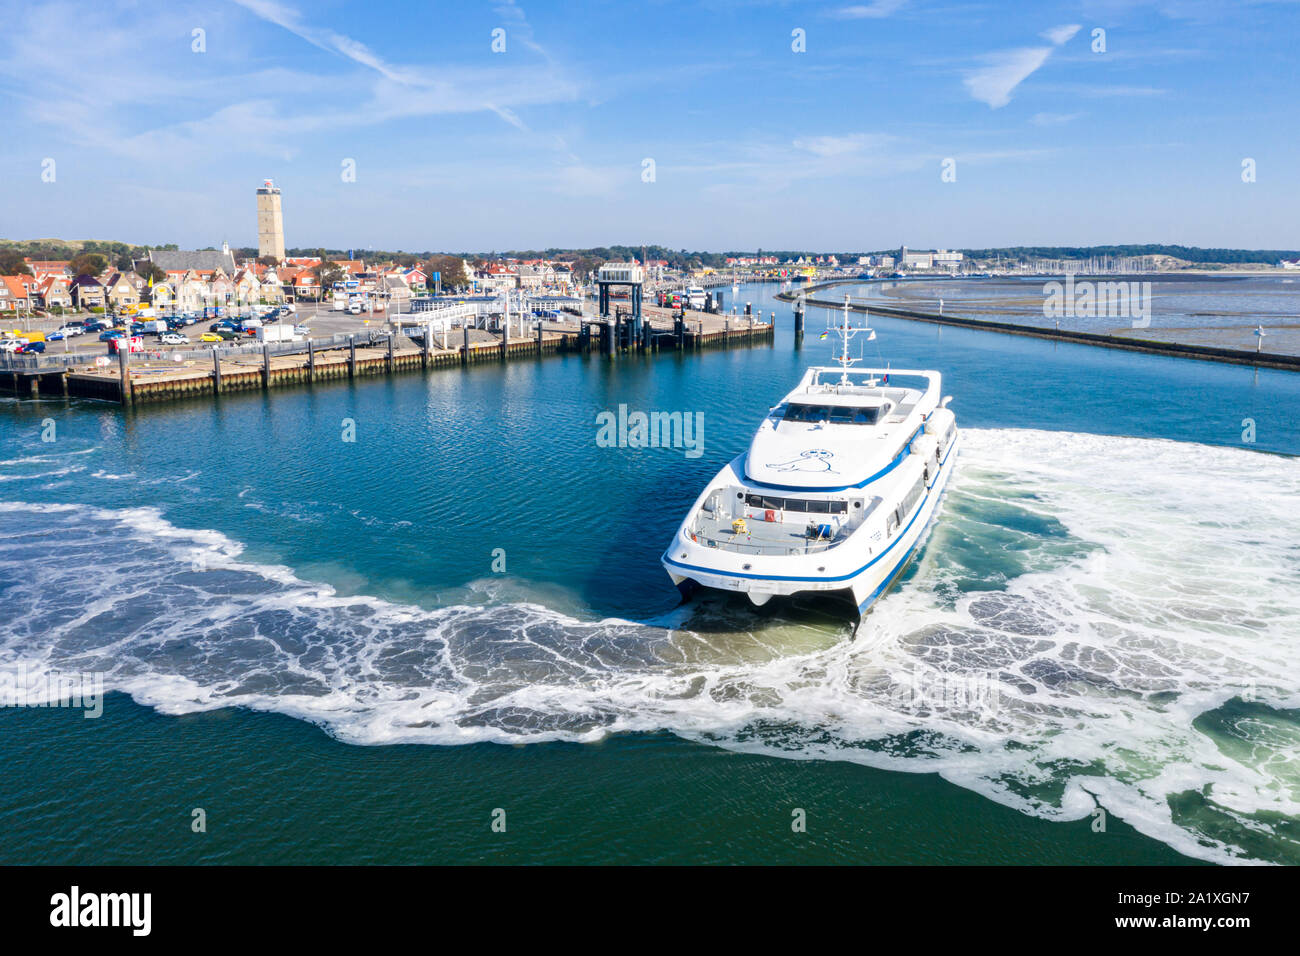 Netherlands, Terschelling - Aug 25, 2019: Catamaran MS Tiger leaves harbour of West-Terschelling, West Frisian Islands on its way to Dutch port of Har Stock Photo